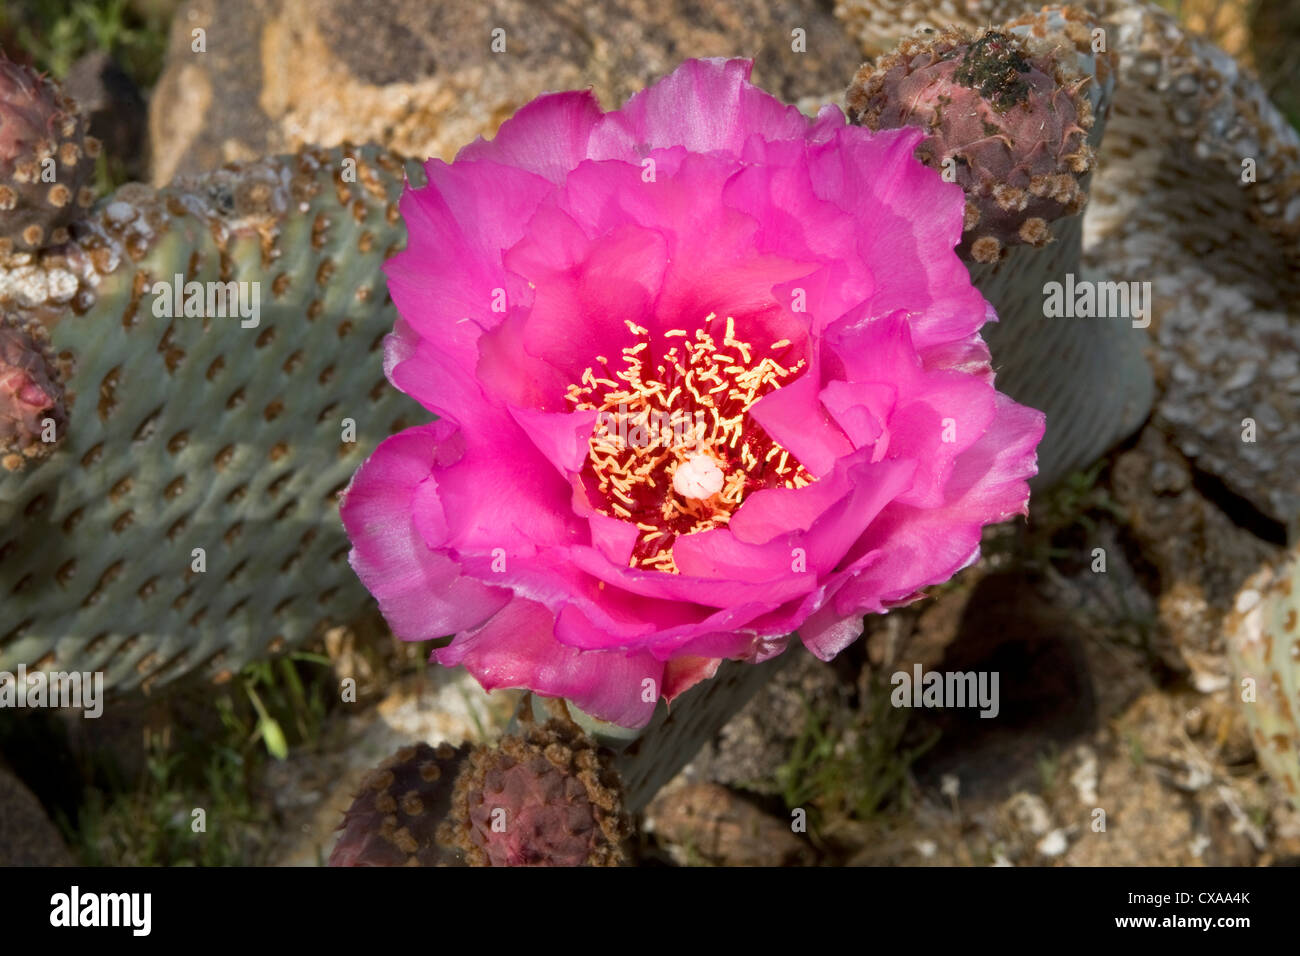 A beavertail prickly pear cactus in bloom. Stock Photo